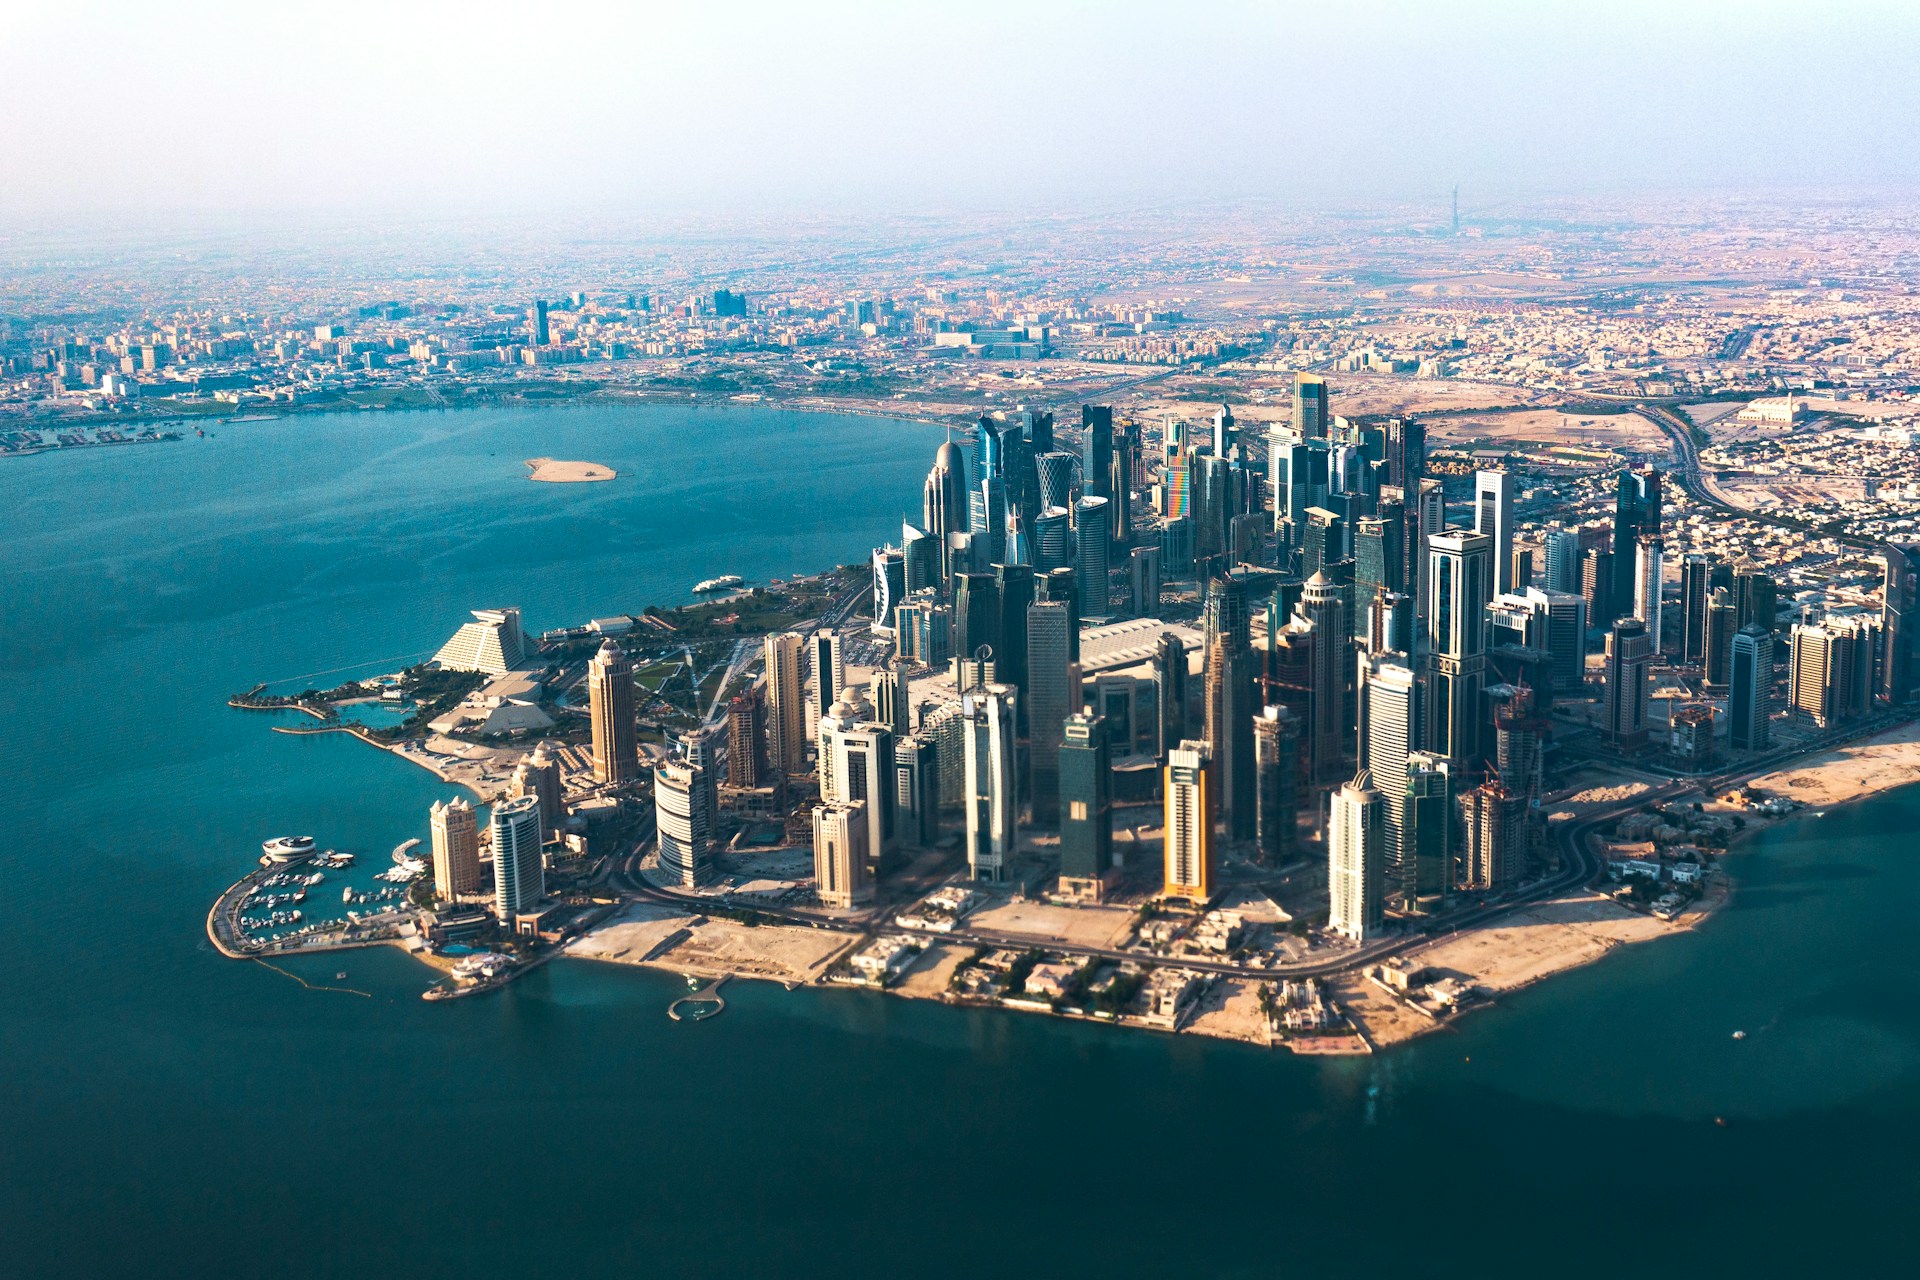 QatarEnergy and Nakilat Land Deal for 25 LNG Newbuilds